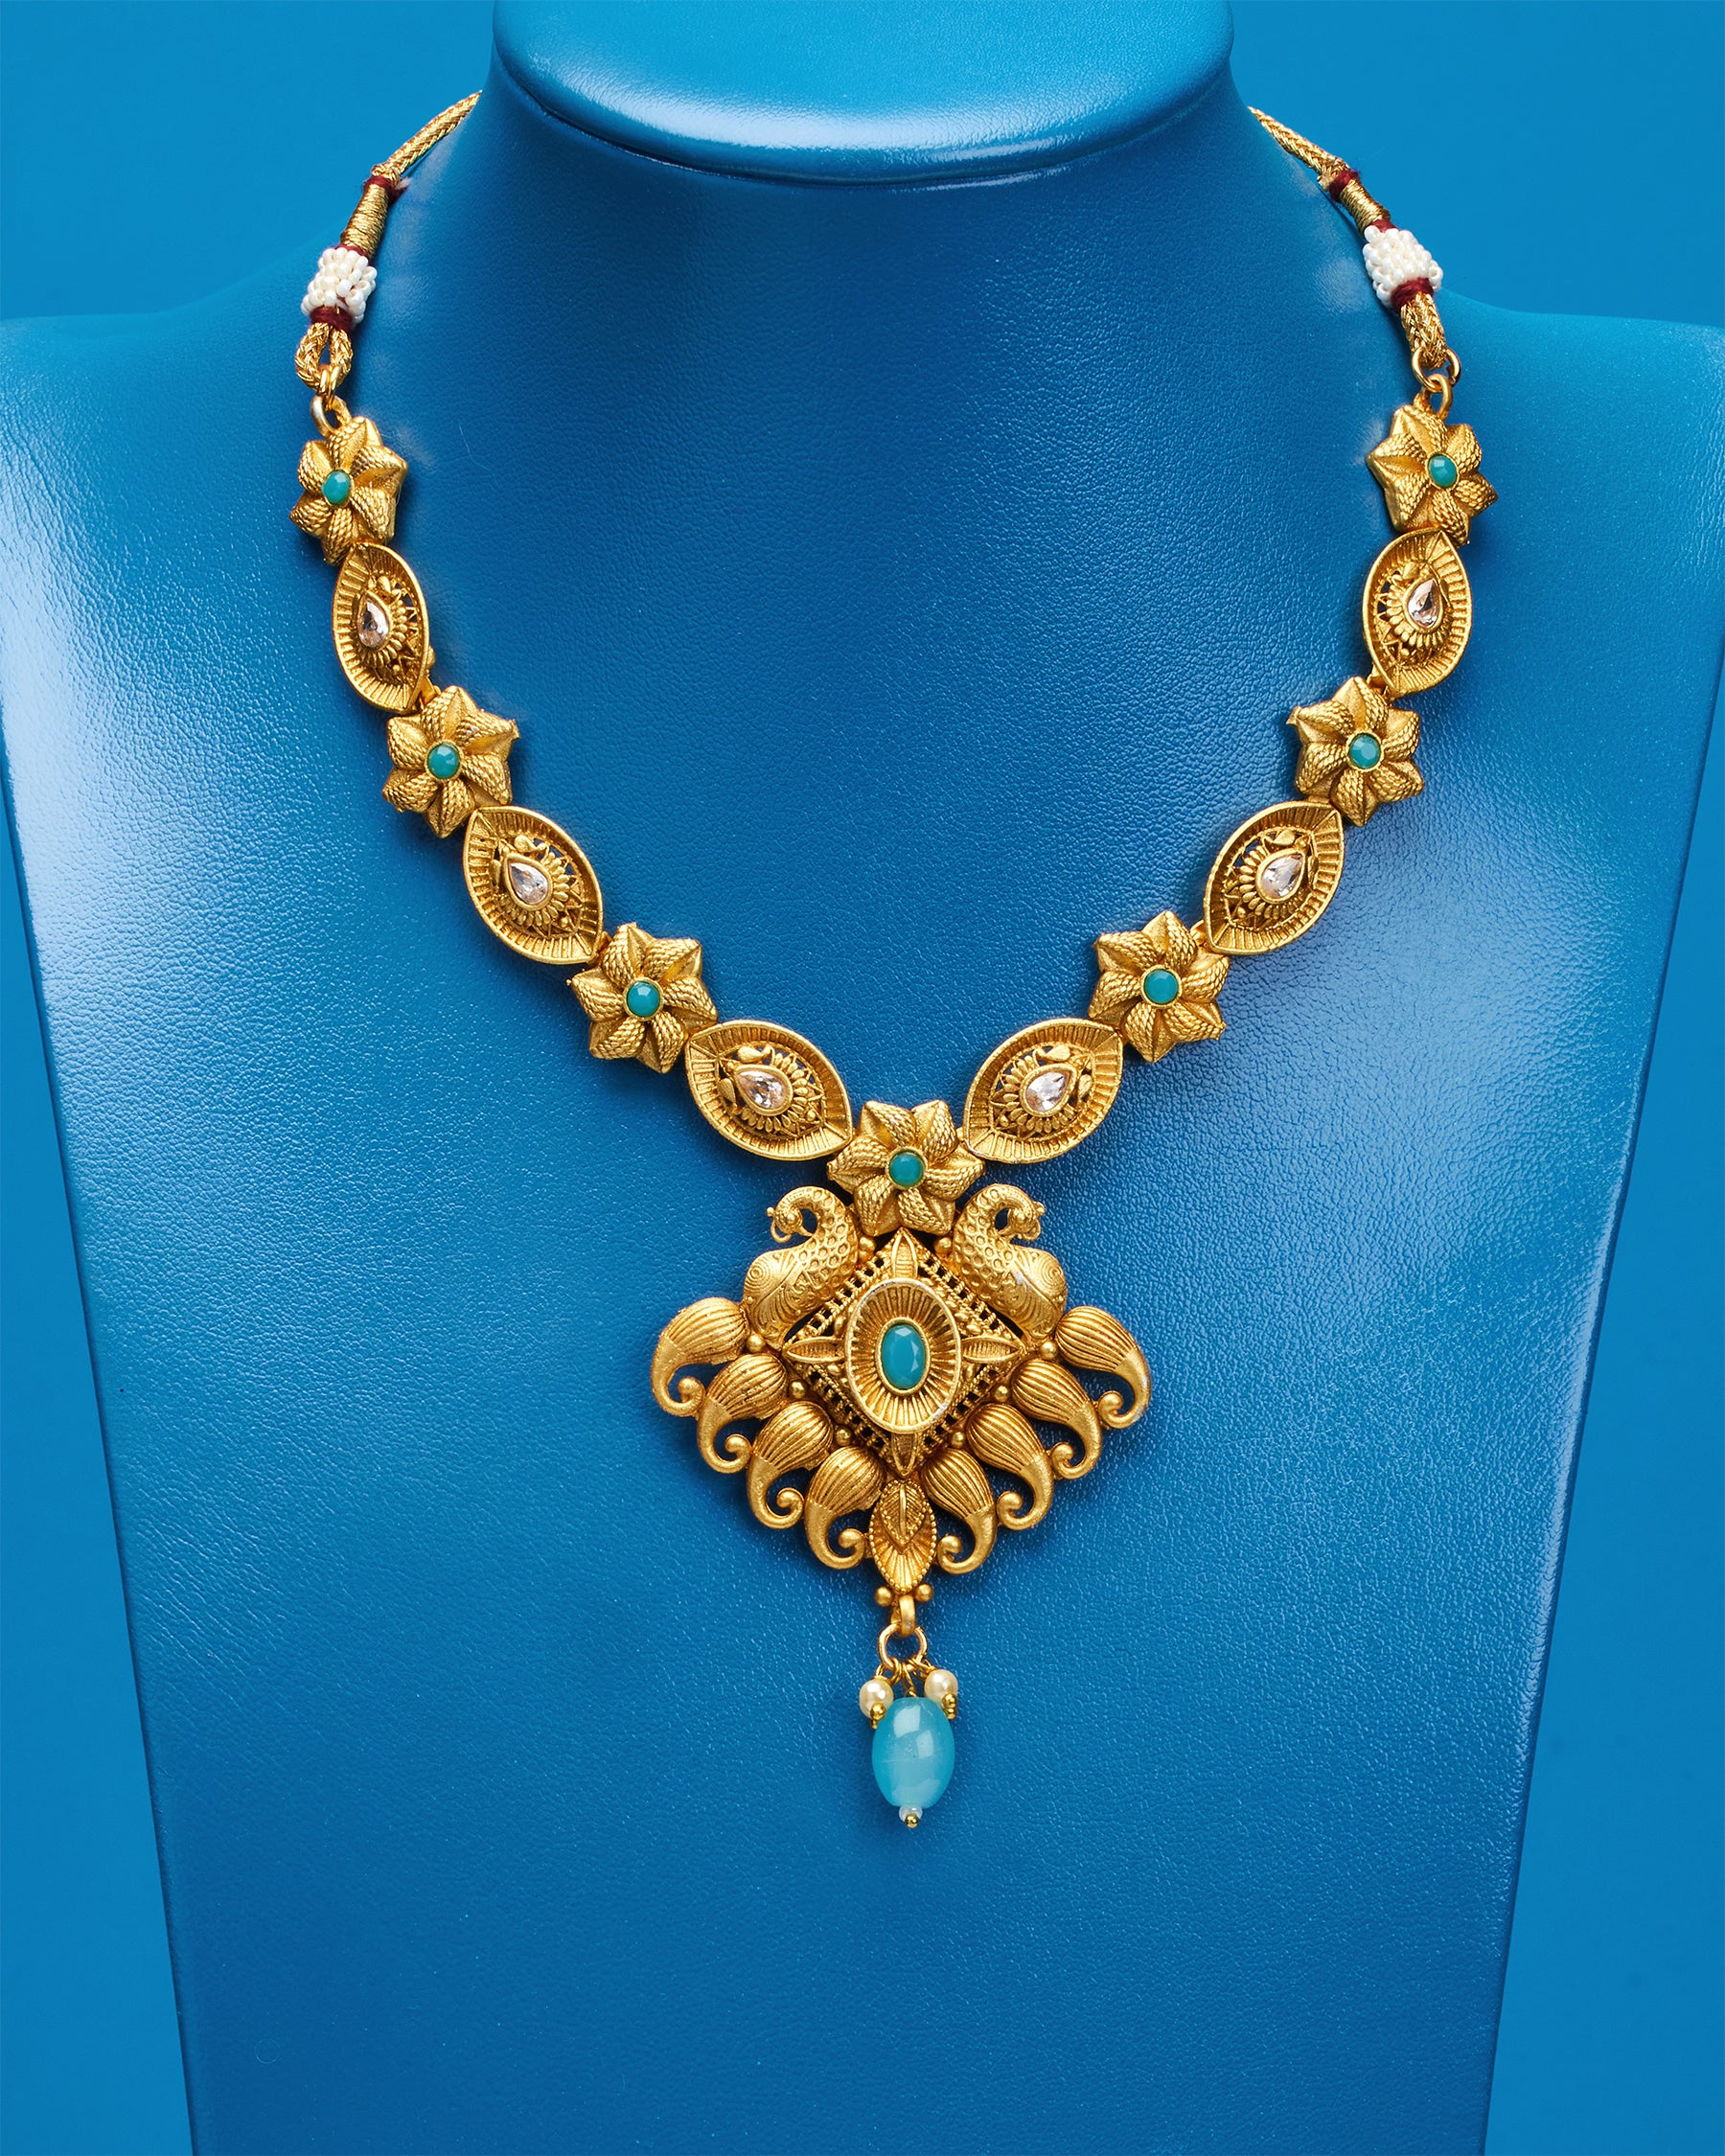 Aria Necklace in Gold Plated Filigree and Aquamarine